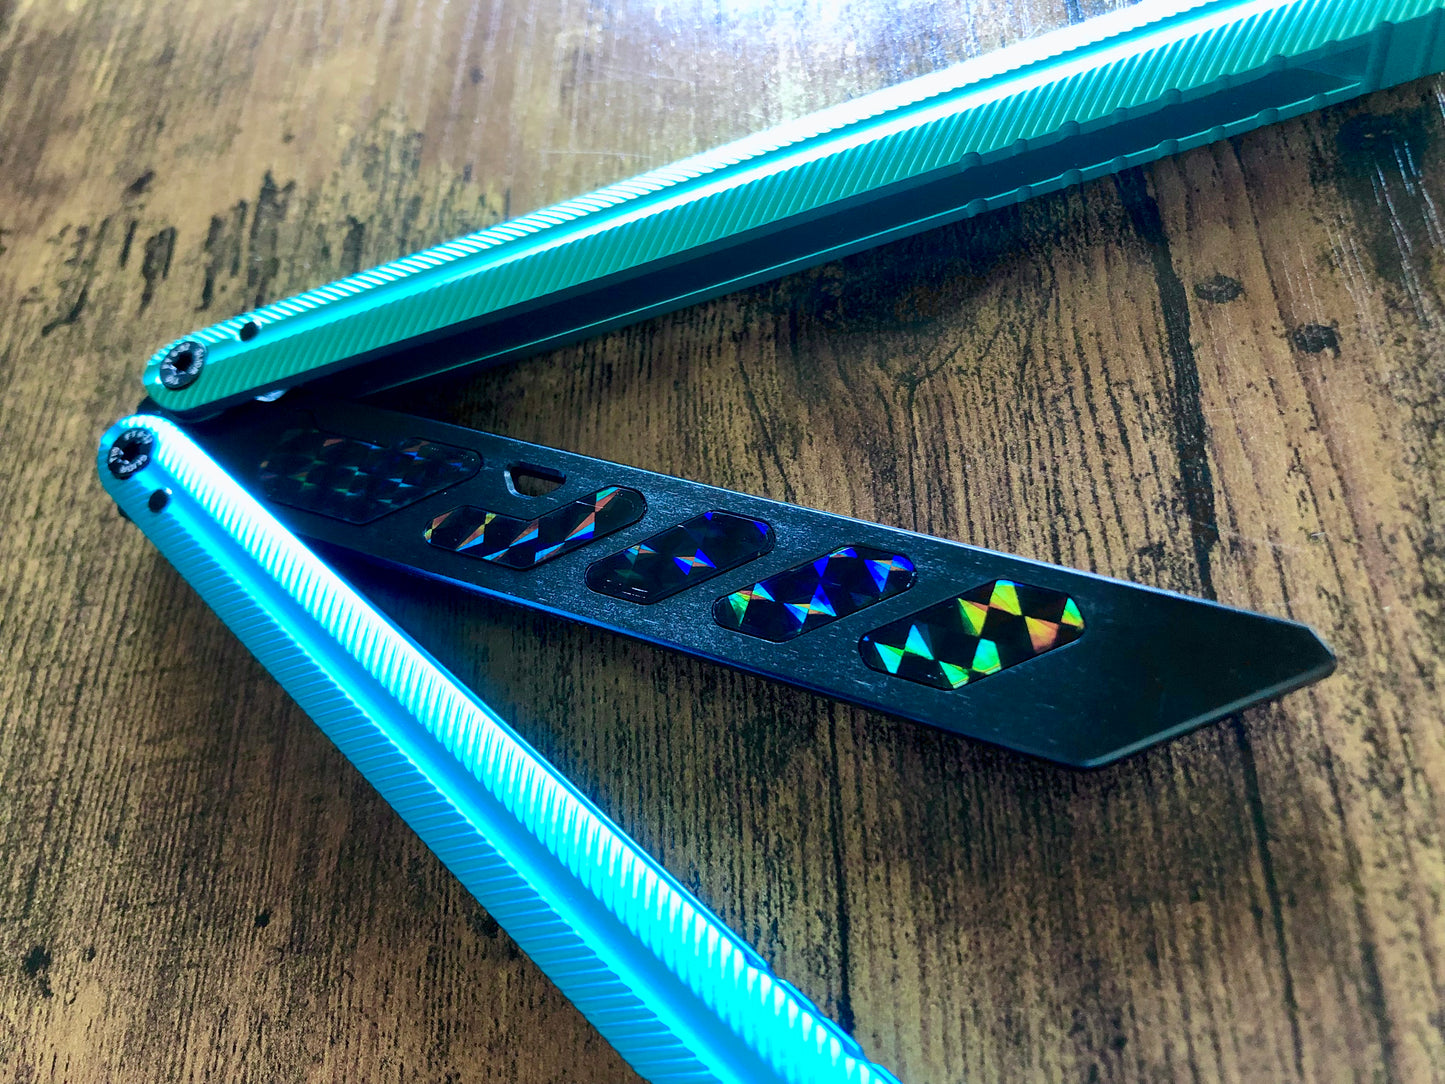 Add a pop of color and a more neutral balance to your Glidr Pacific balisong trainer with these shatter-proof polyurethane Zippy inserts. The inserts increase momentum and can be used to compensate for the added handle weight from the stock Glidr handle weights to maintain your favored balance profile.